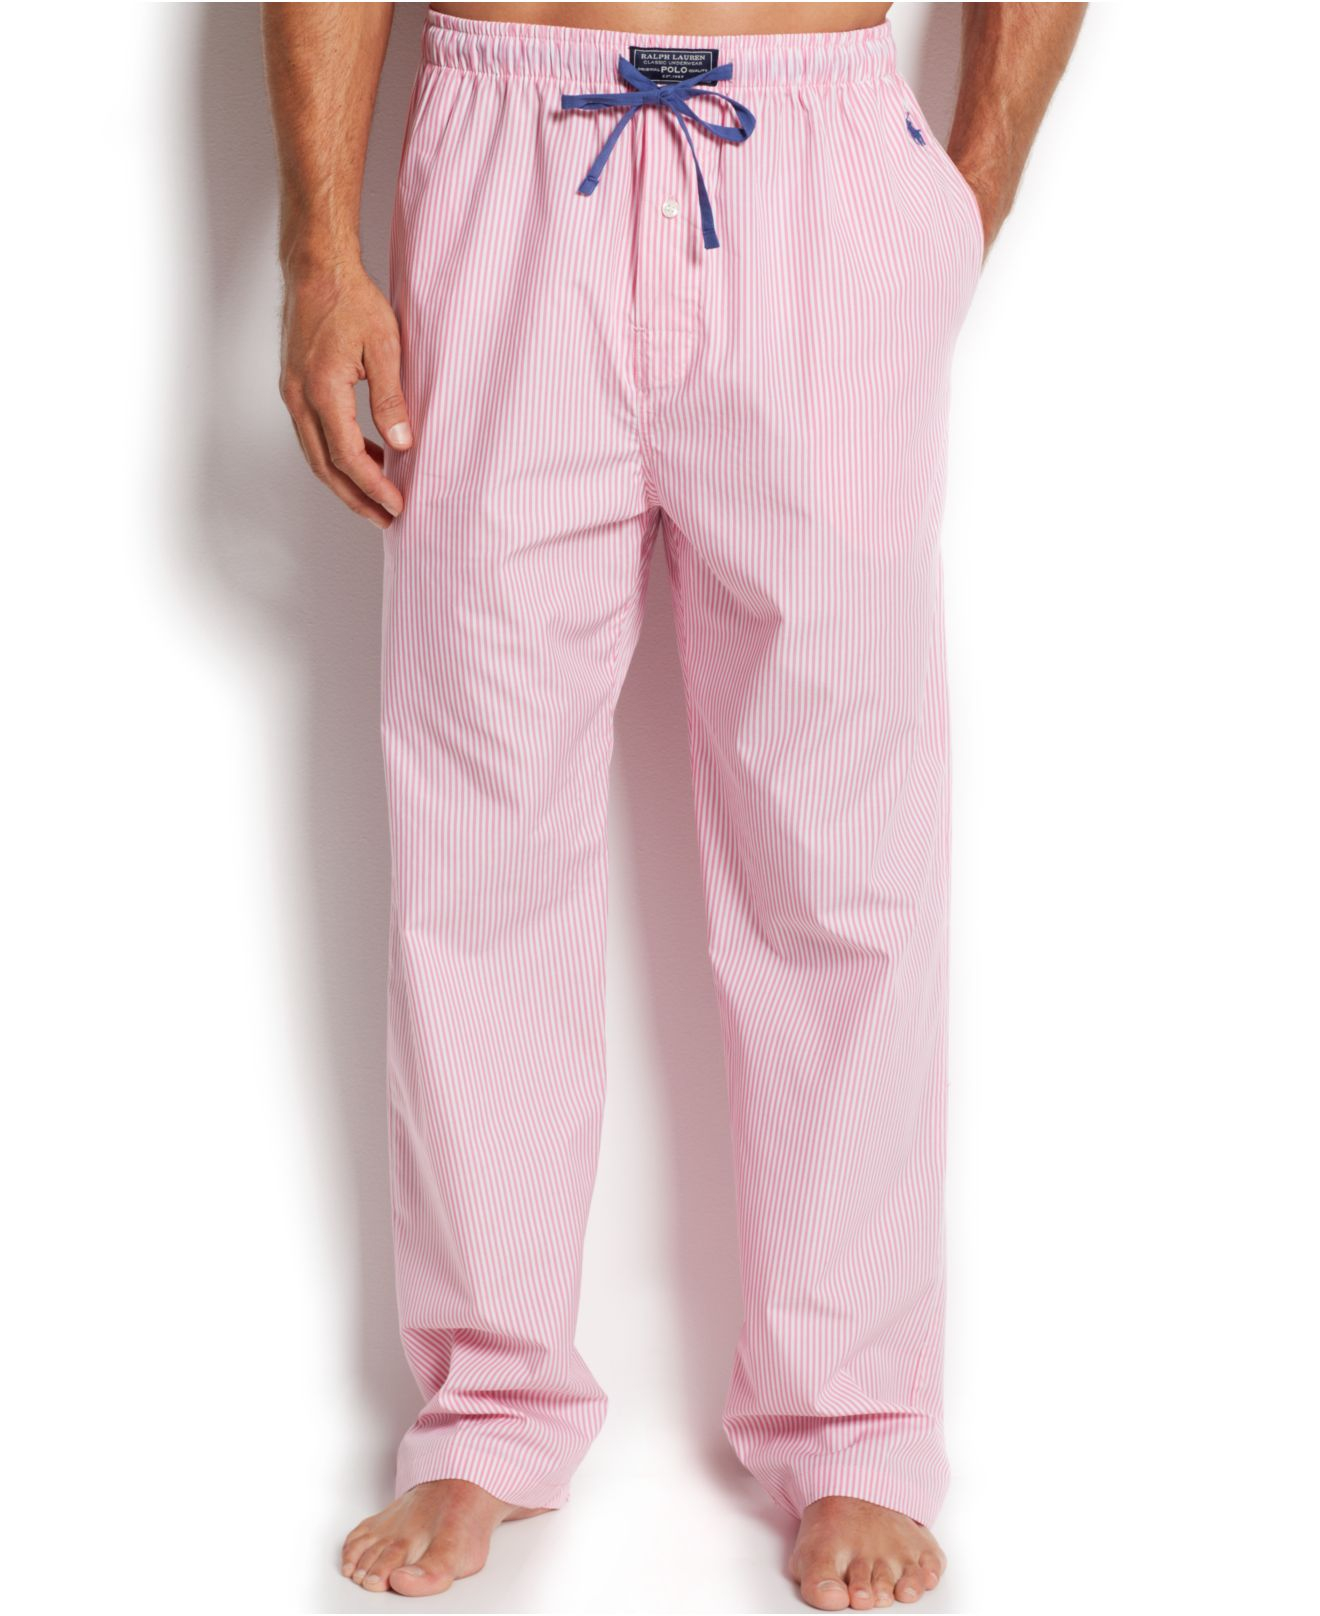 Polo Ralph Lauren Striped Pajama Pants in Pink for Men - Lyst